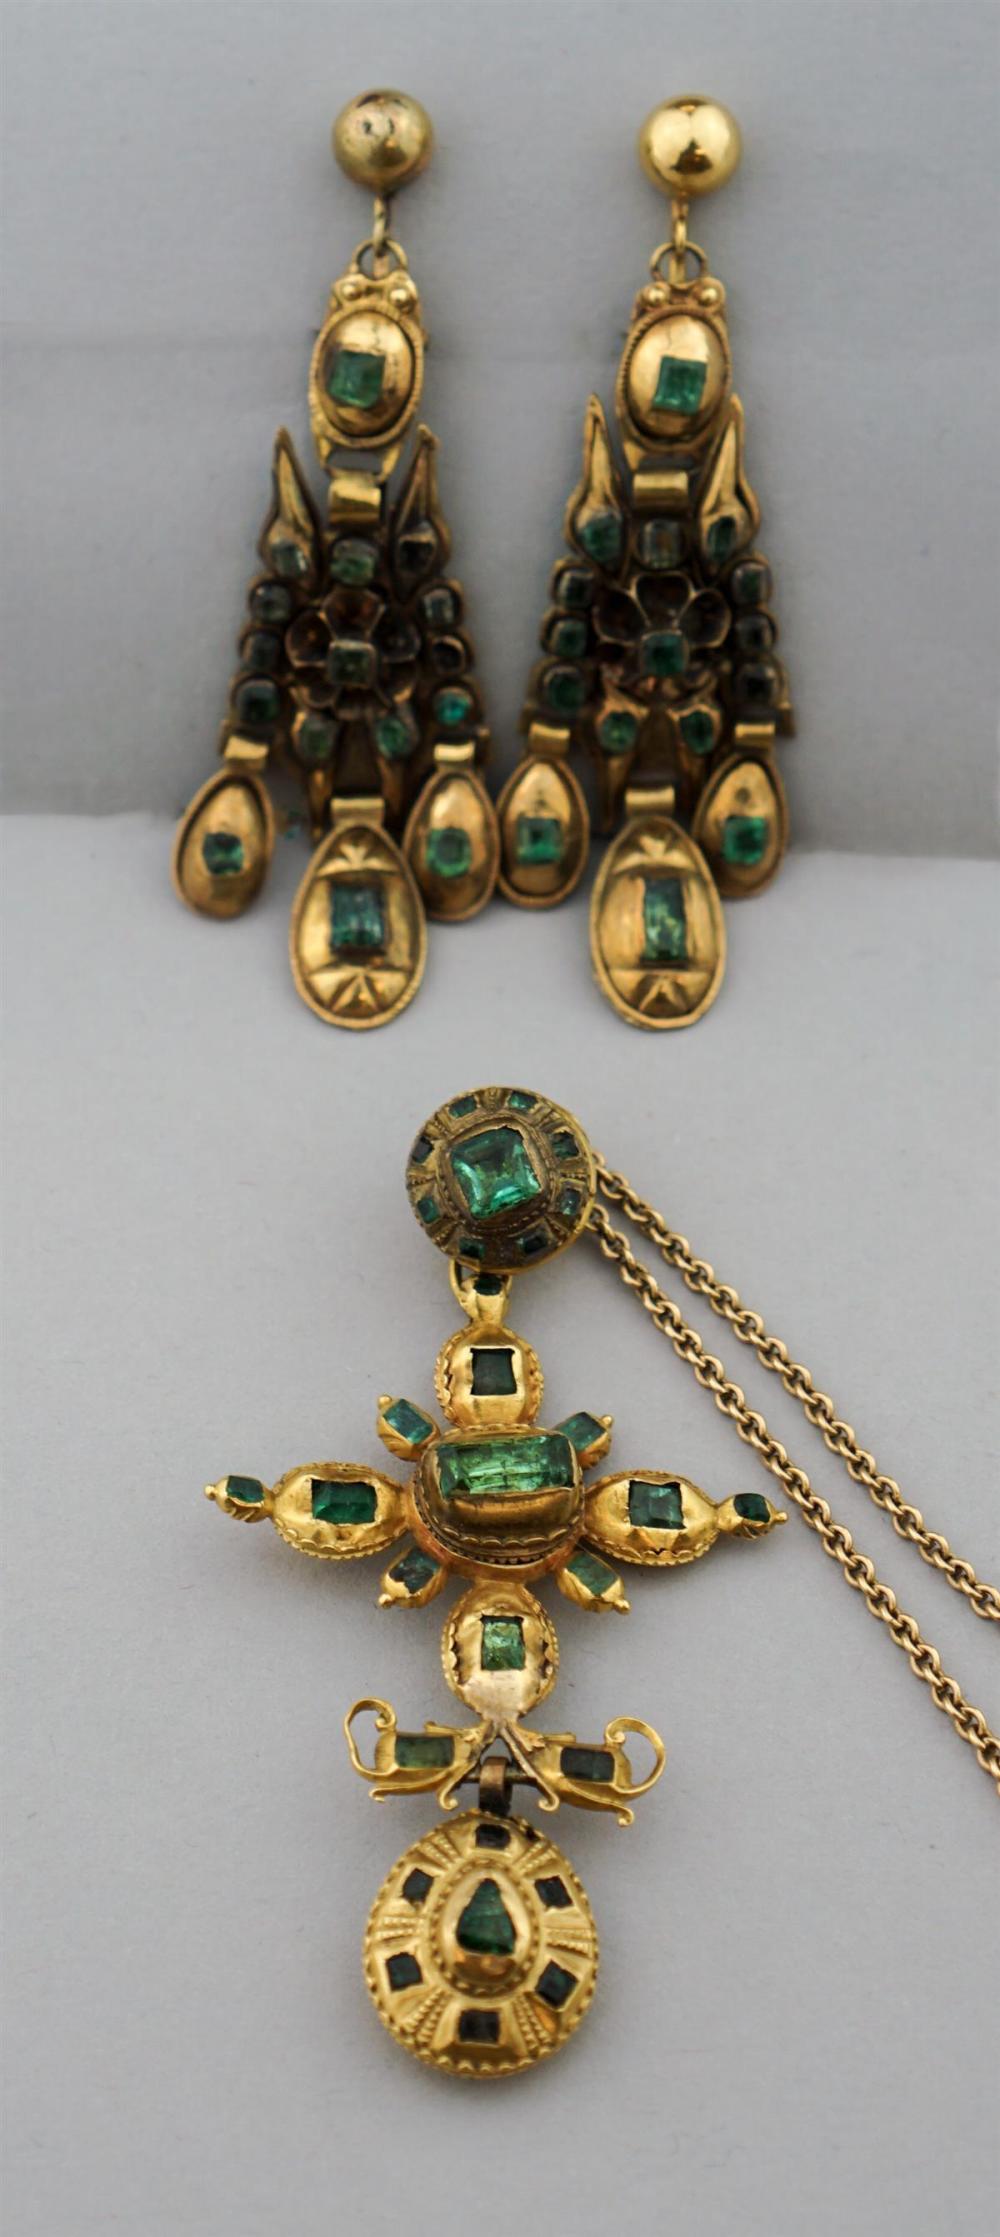 VICTORIAN GOLD AND EMERALD NECKLACE 339a59